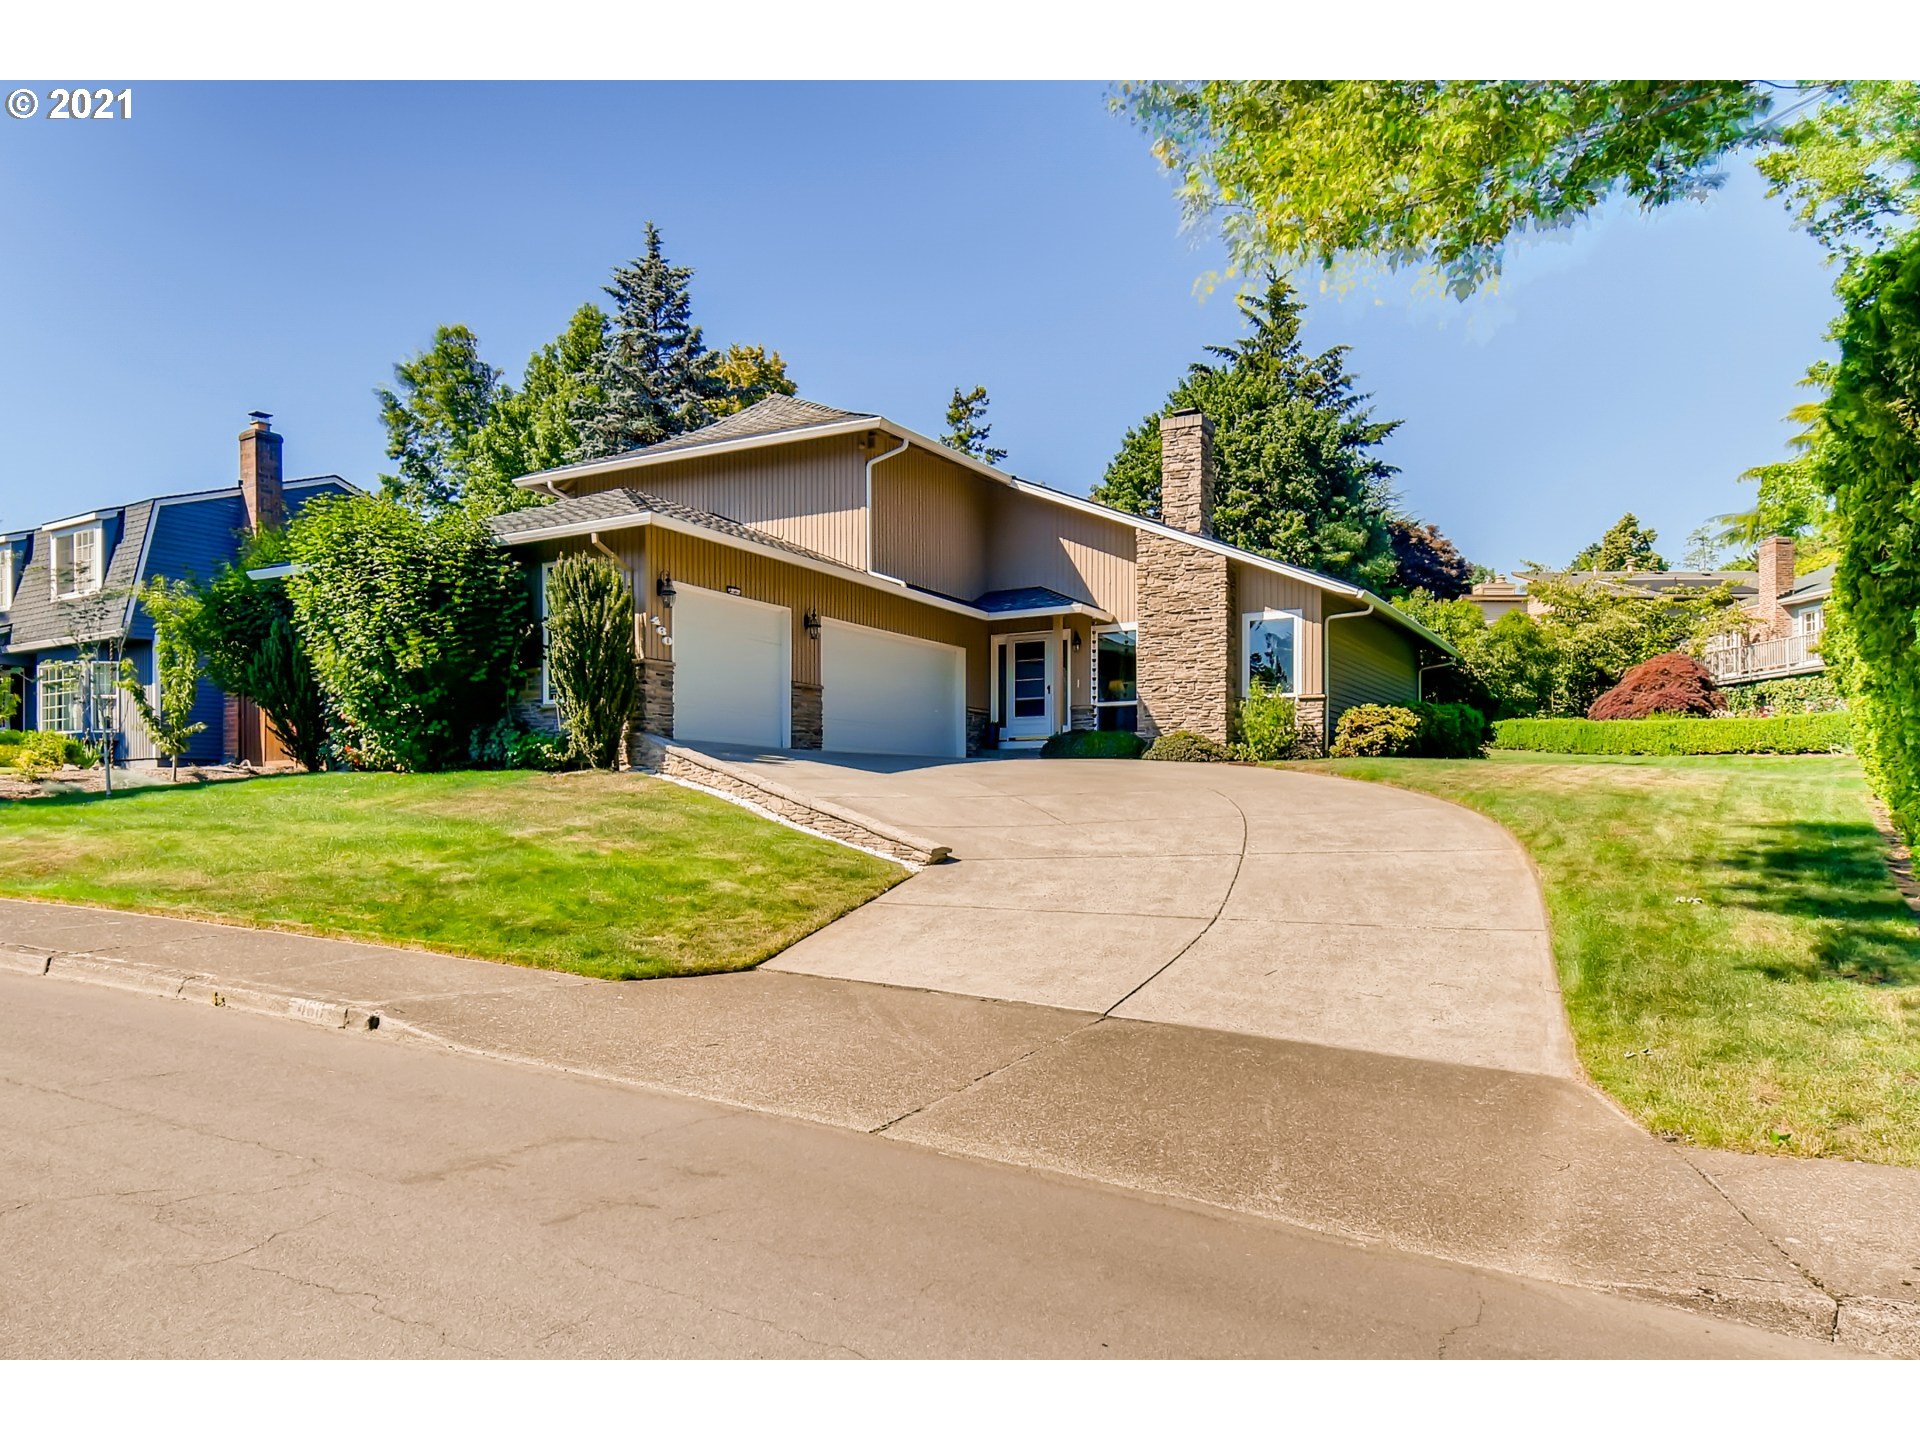 460 NW TORREYVIEW LN (1 of 28)